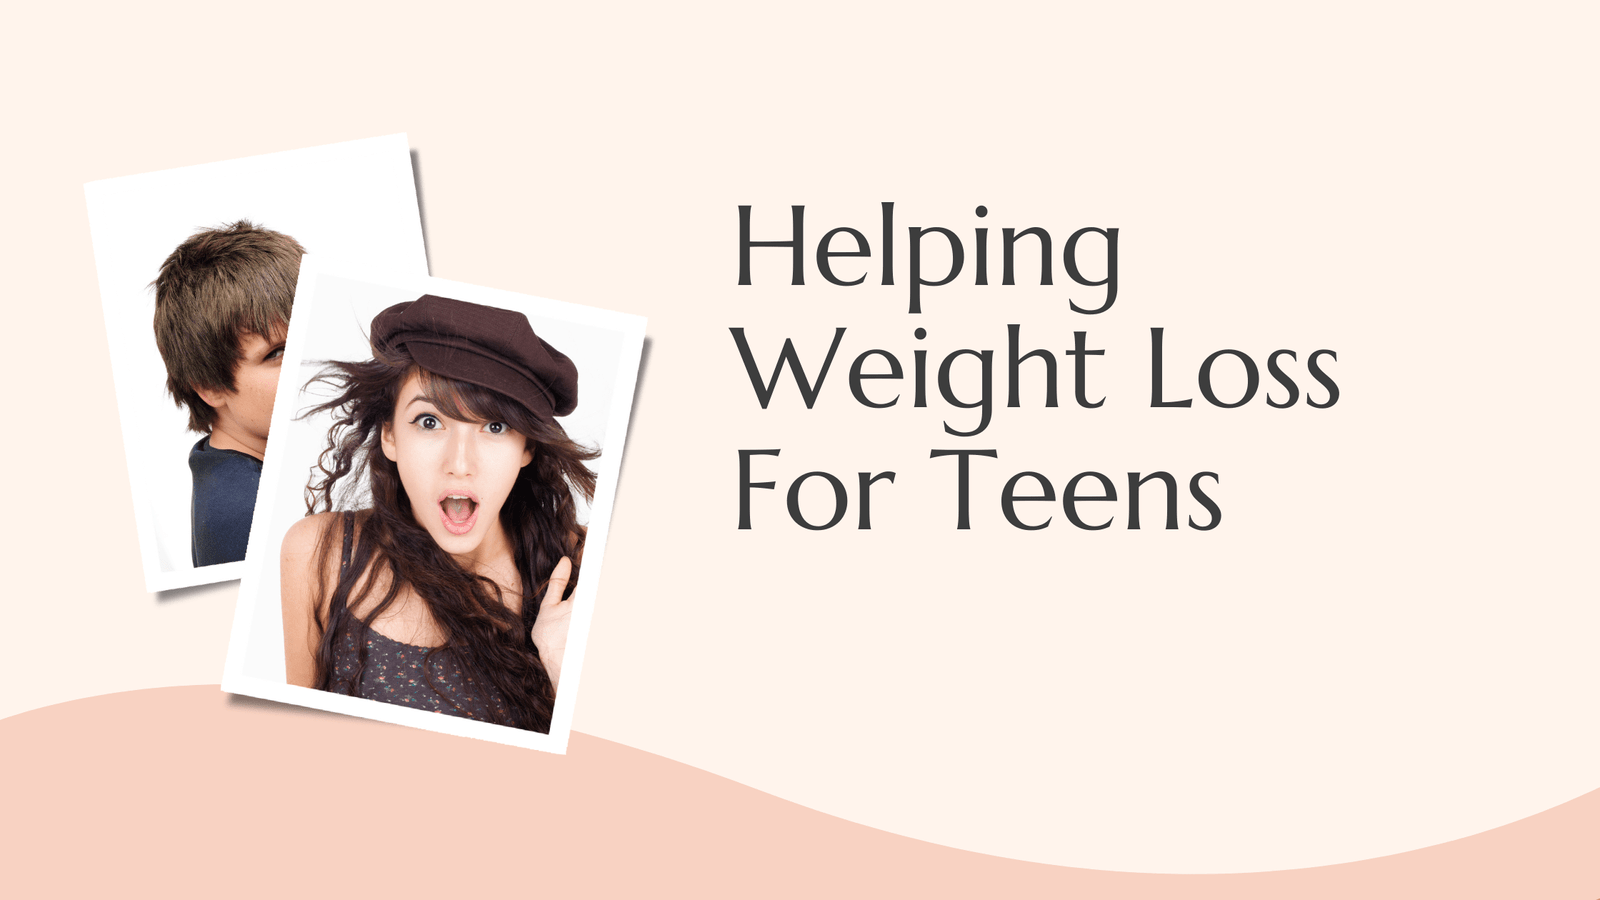 Healthy Weight Loss for Teens